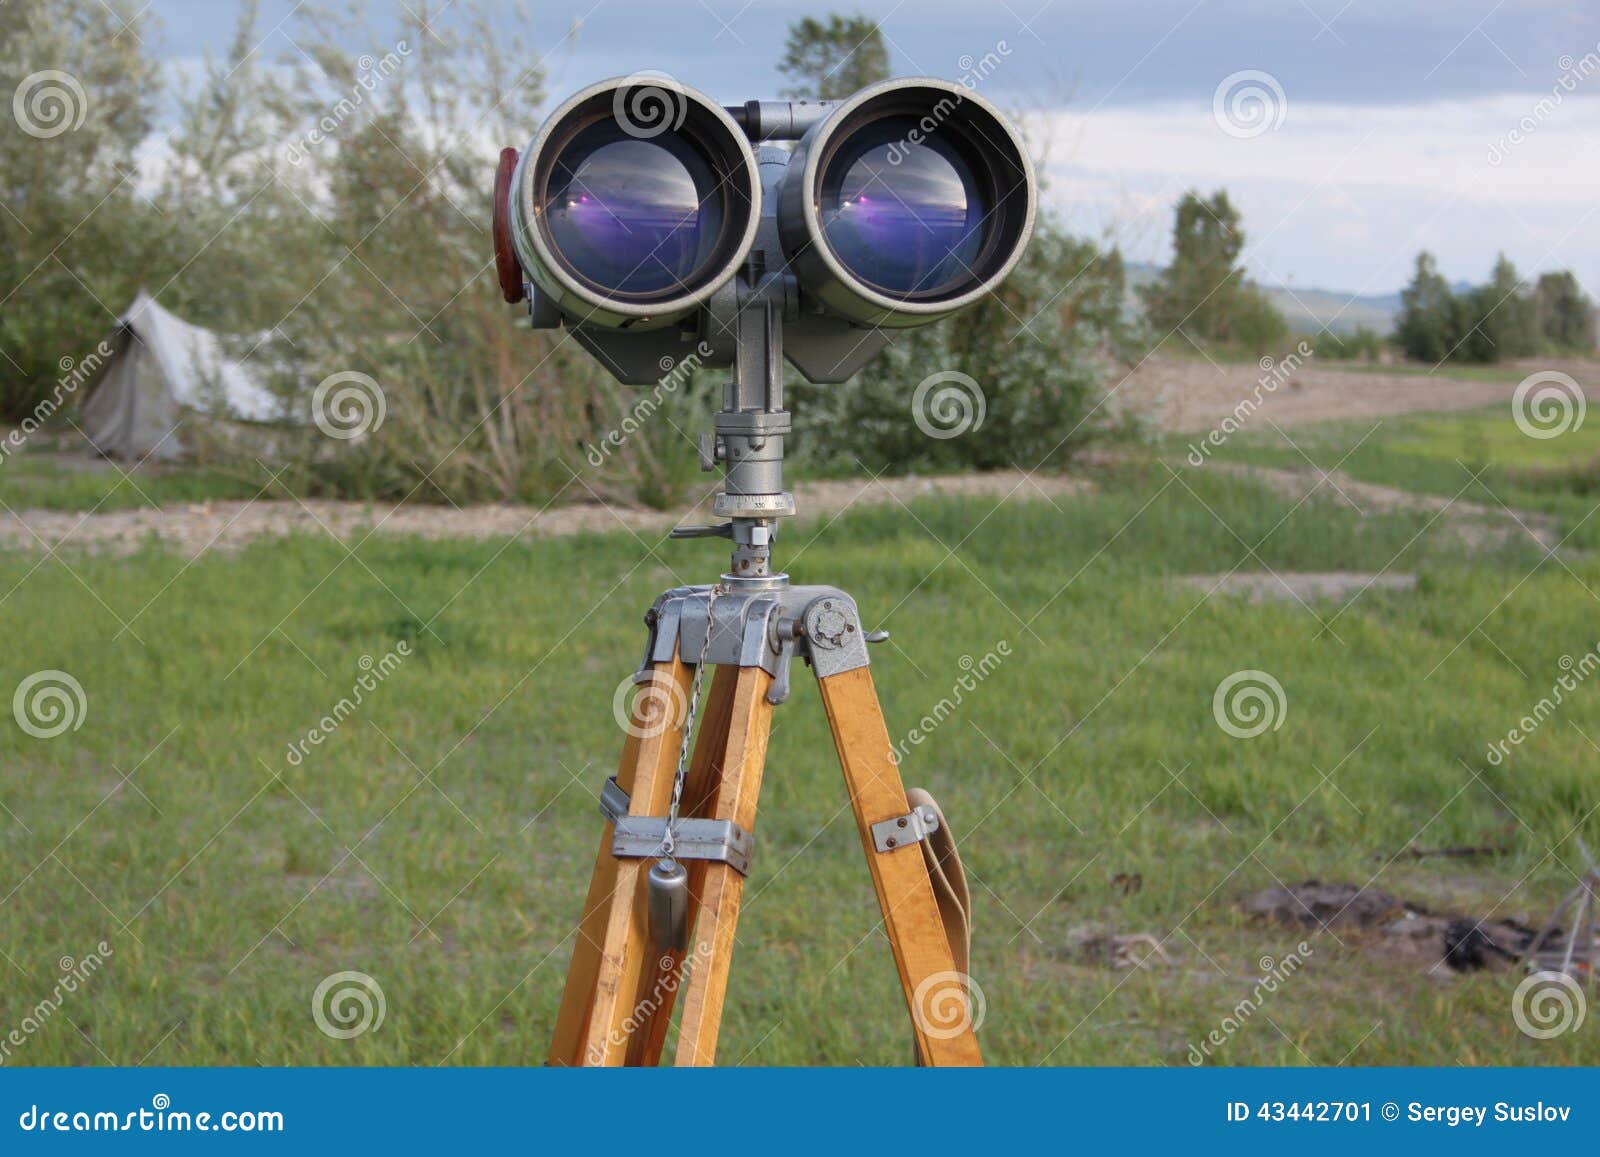 a binoculars with a tripod with a azimuth head in a forest on a sand with grass